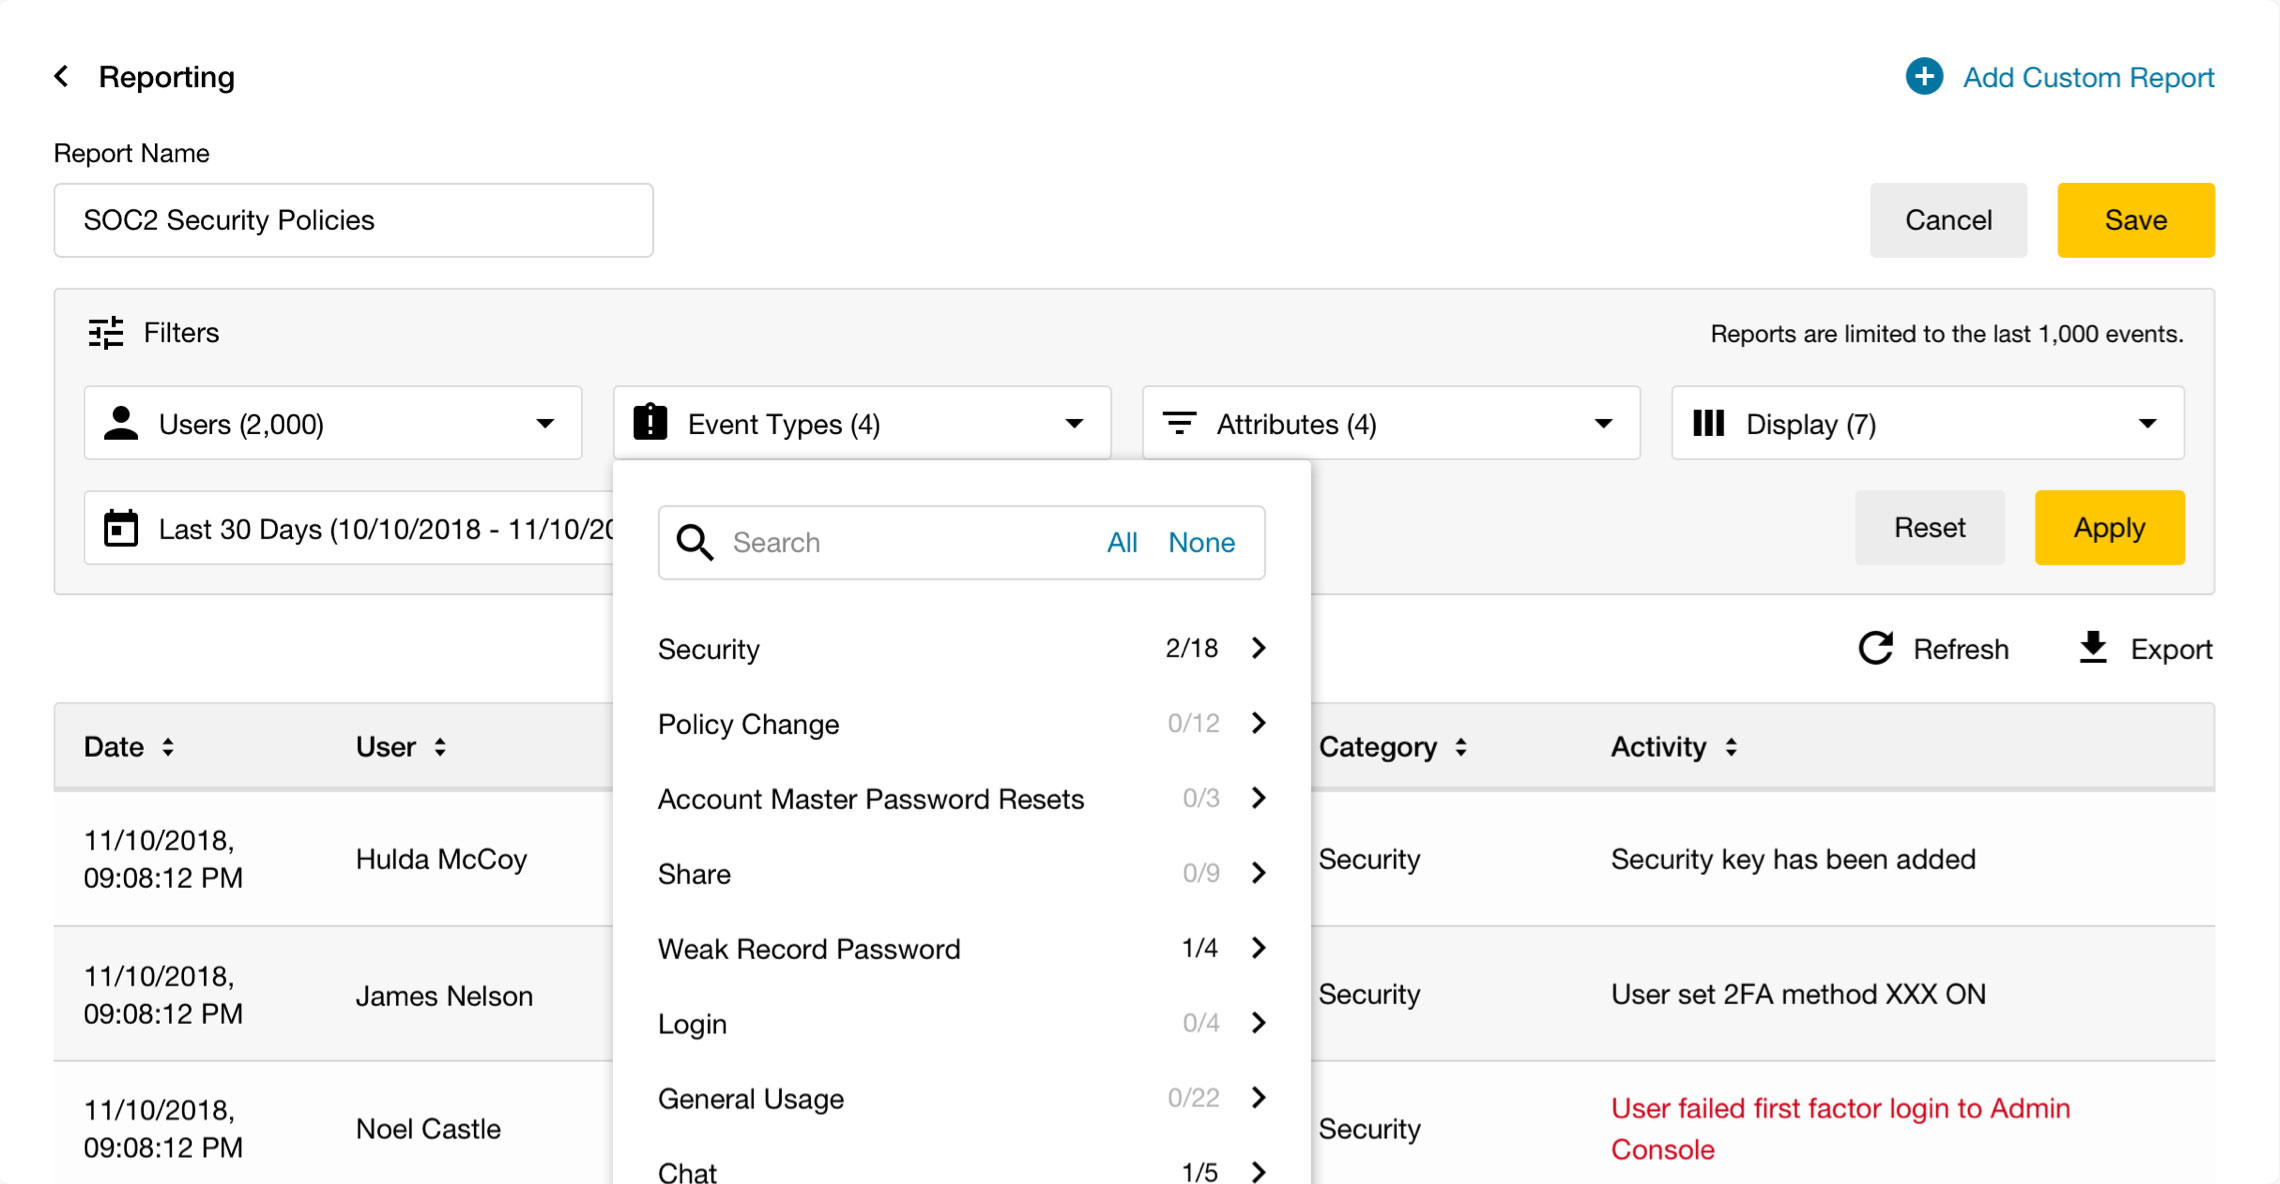 Customize reports with a variety of attributes to focus views